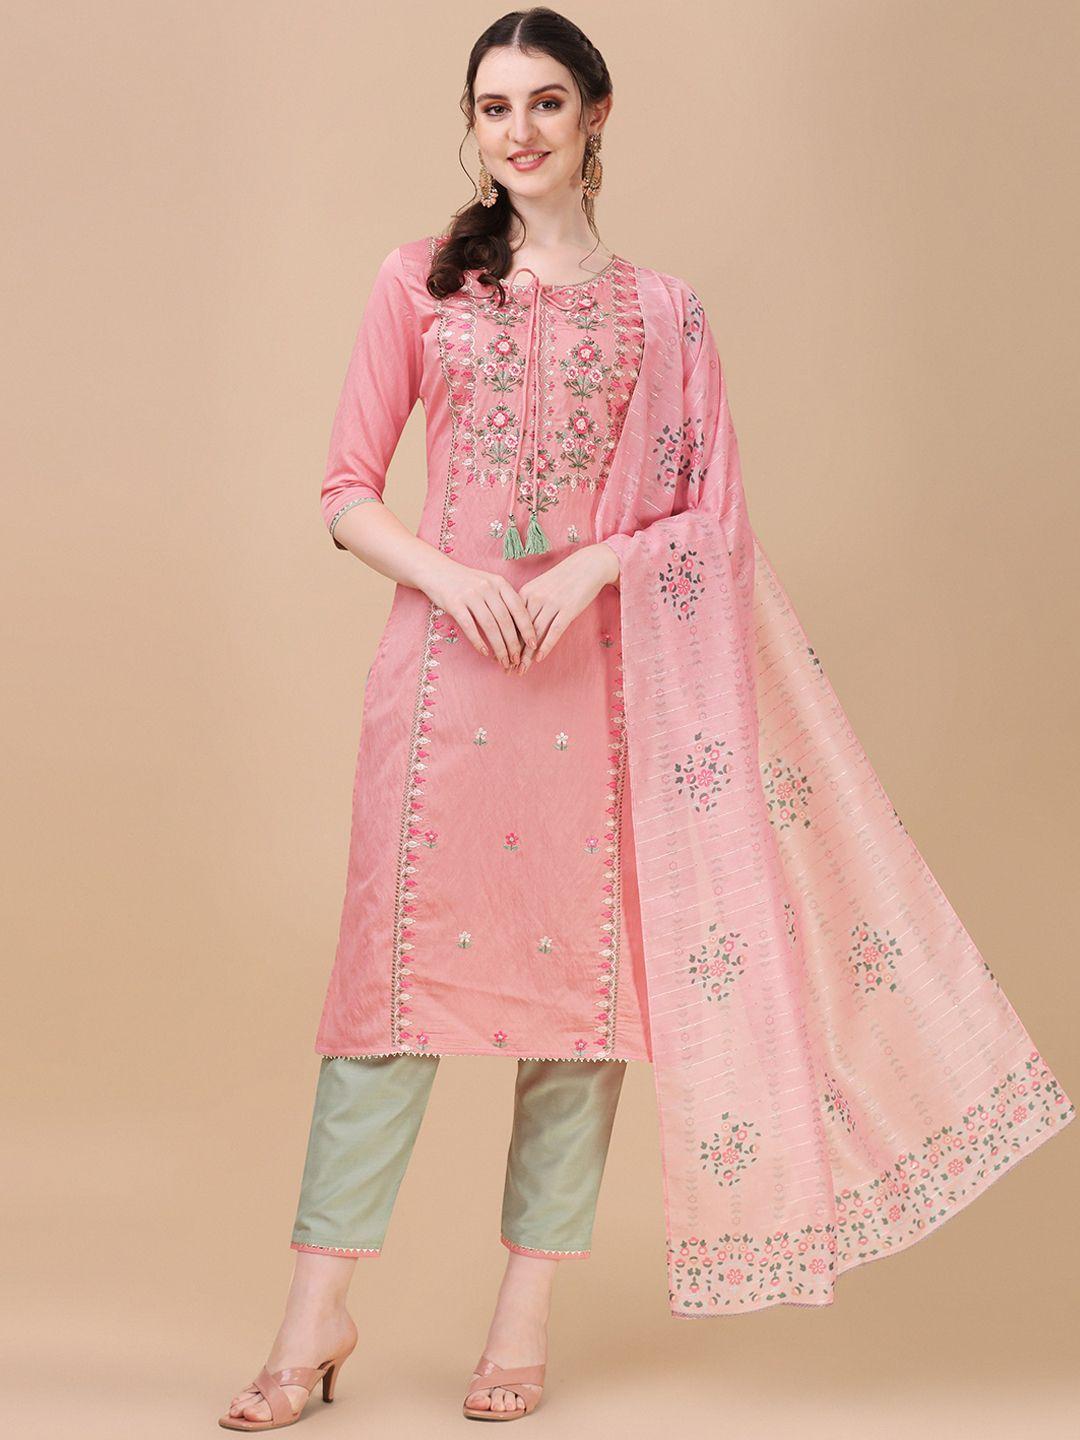 berrylicious-pink-floral-embroidered-thread-work-chanderi-cotton-kurta-with-trousers-&-dupatta